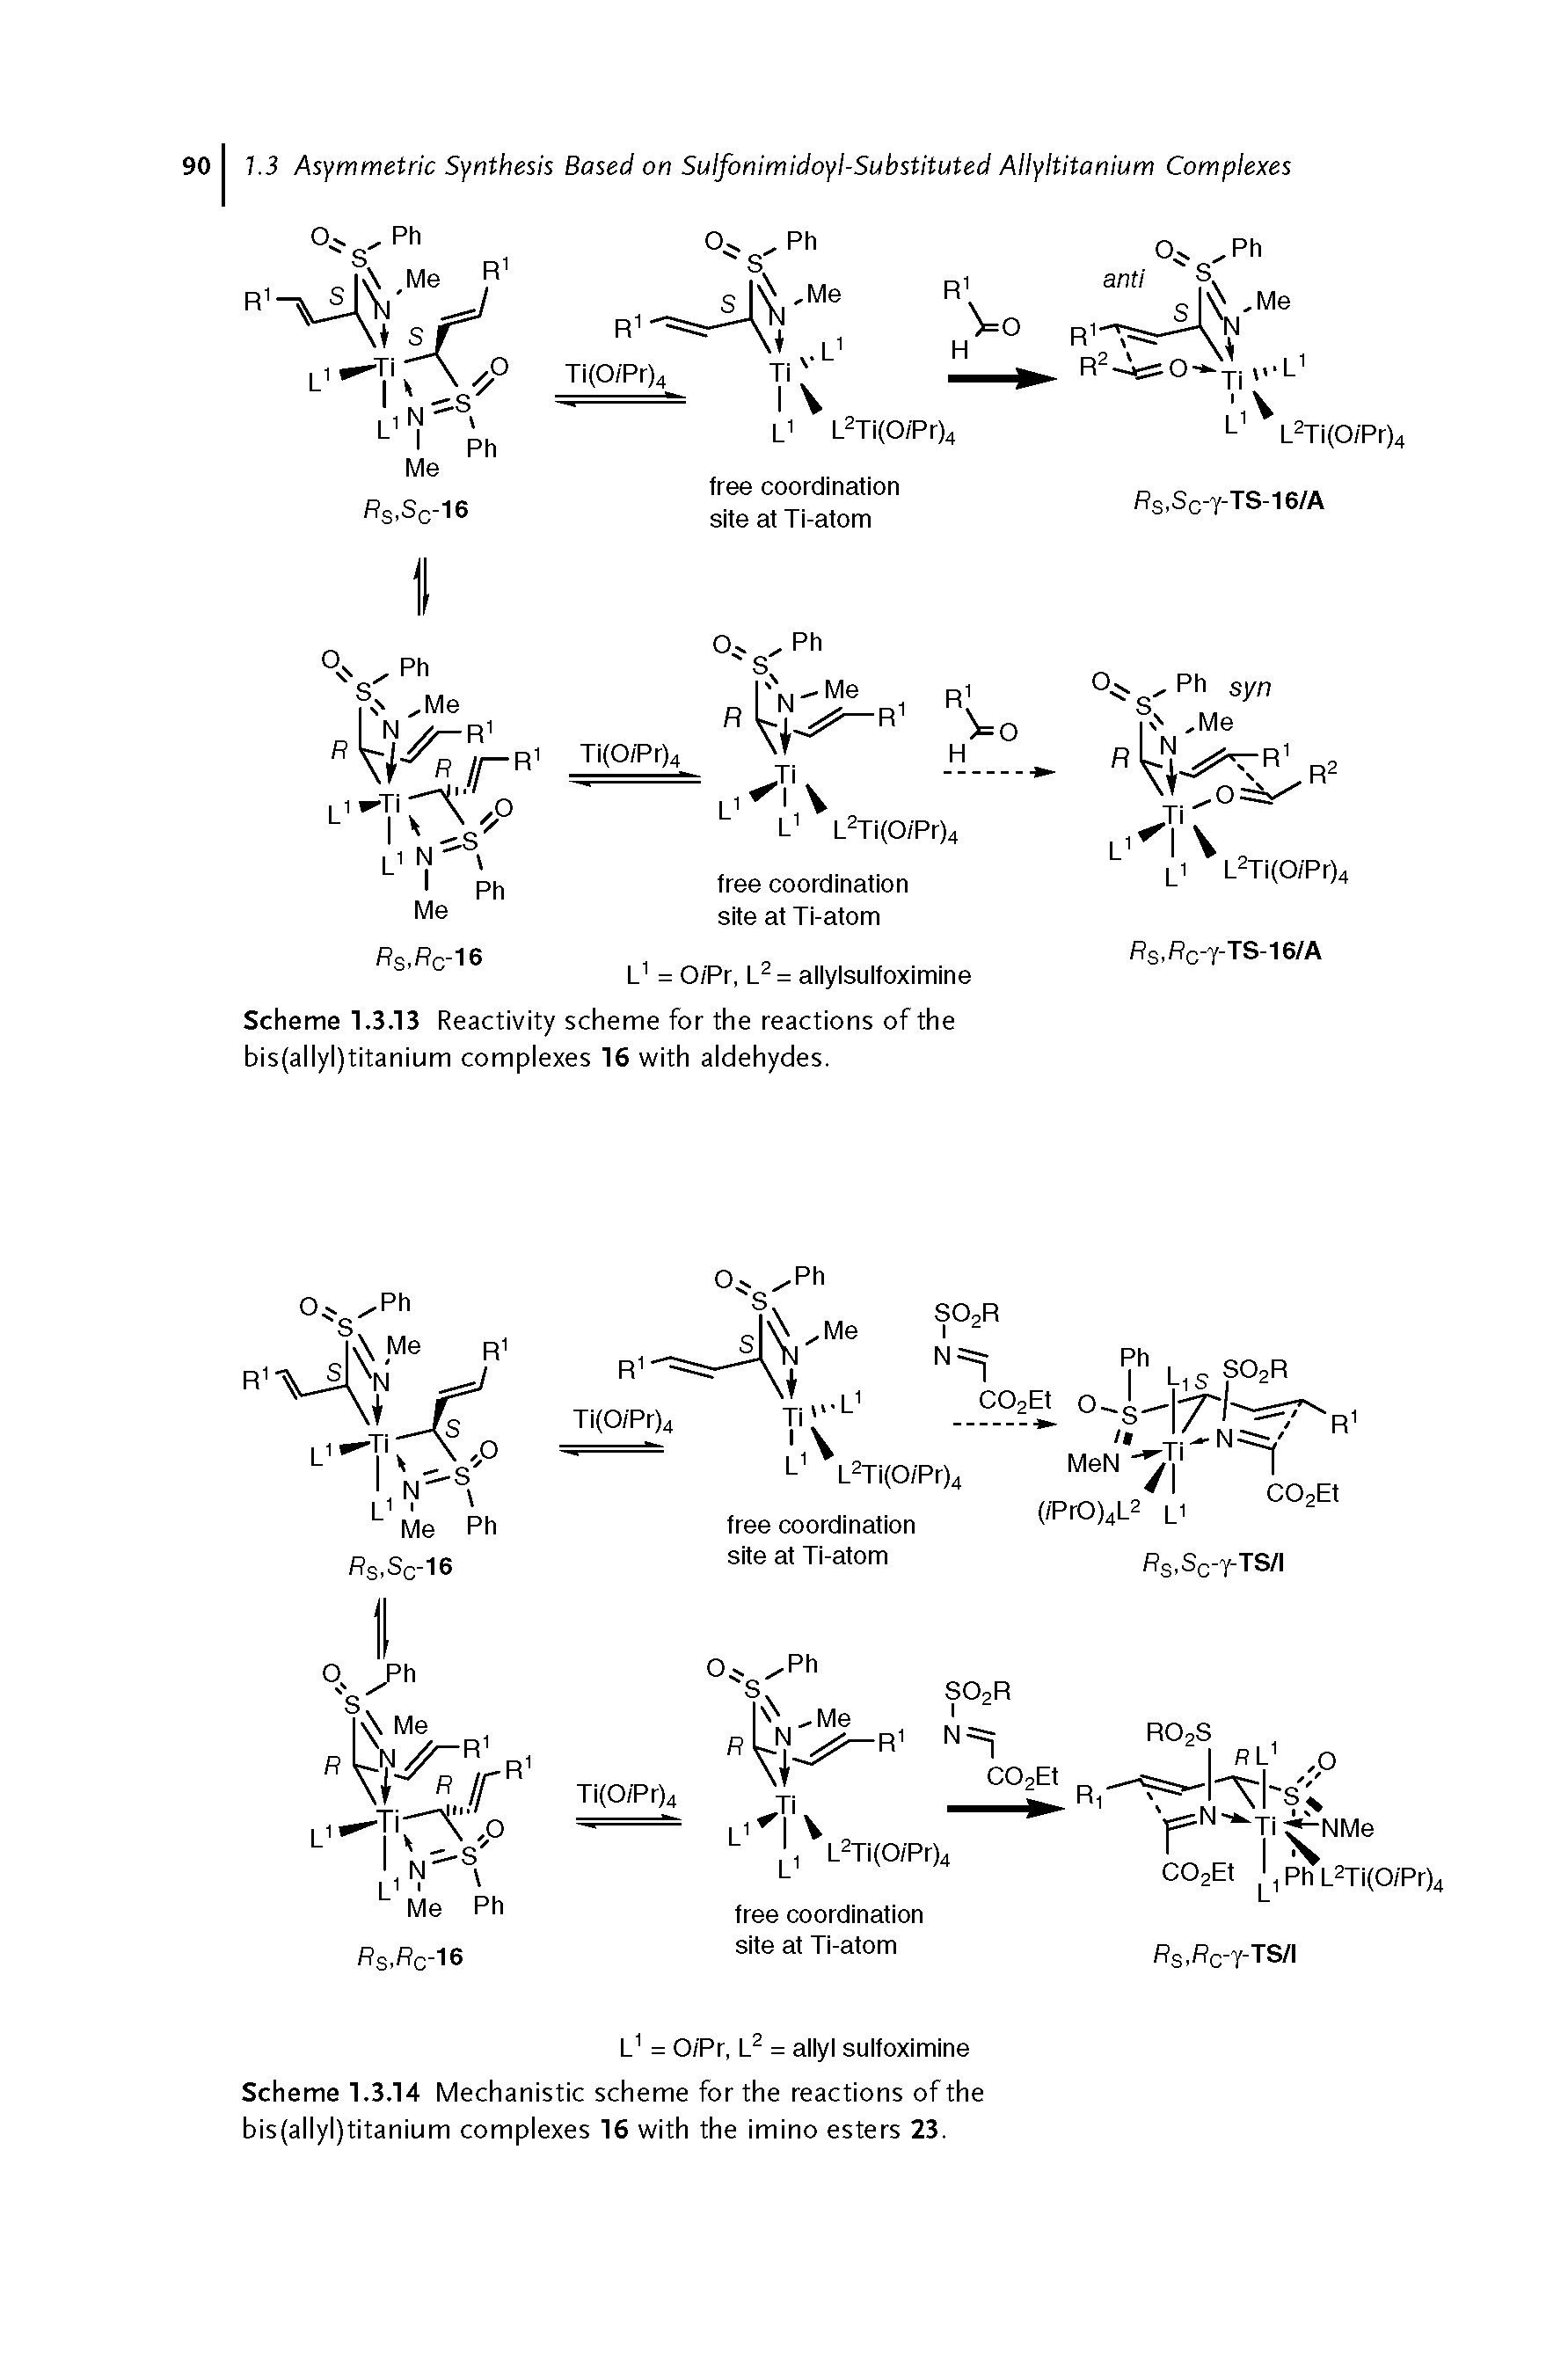 Scheme 1.3.14 Mechanistic scheme for the reactions of the bis(allyl)titanium complexes 16 with the imino esters 23.